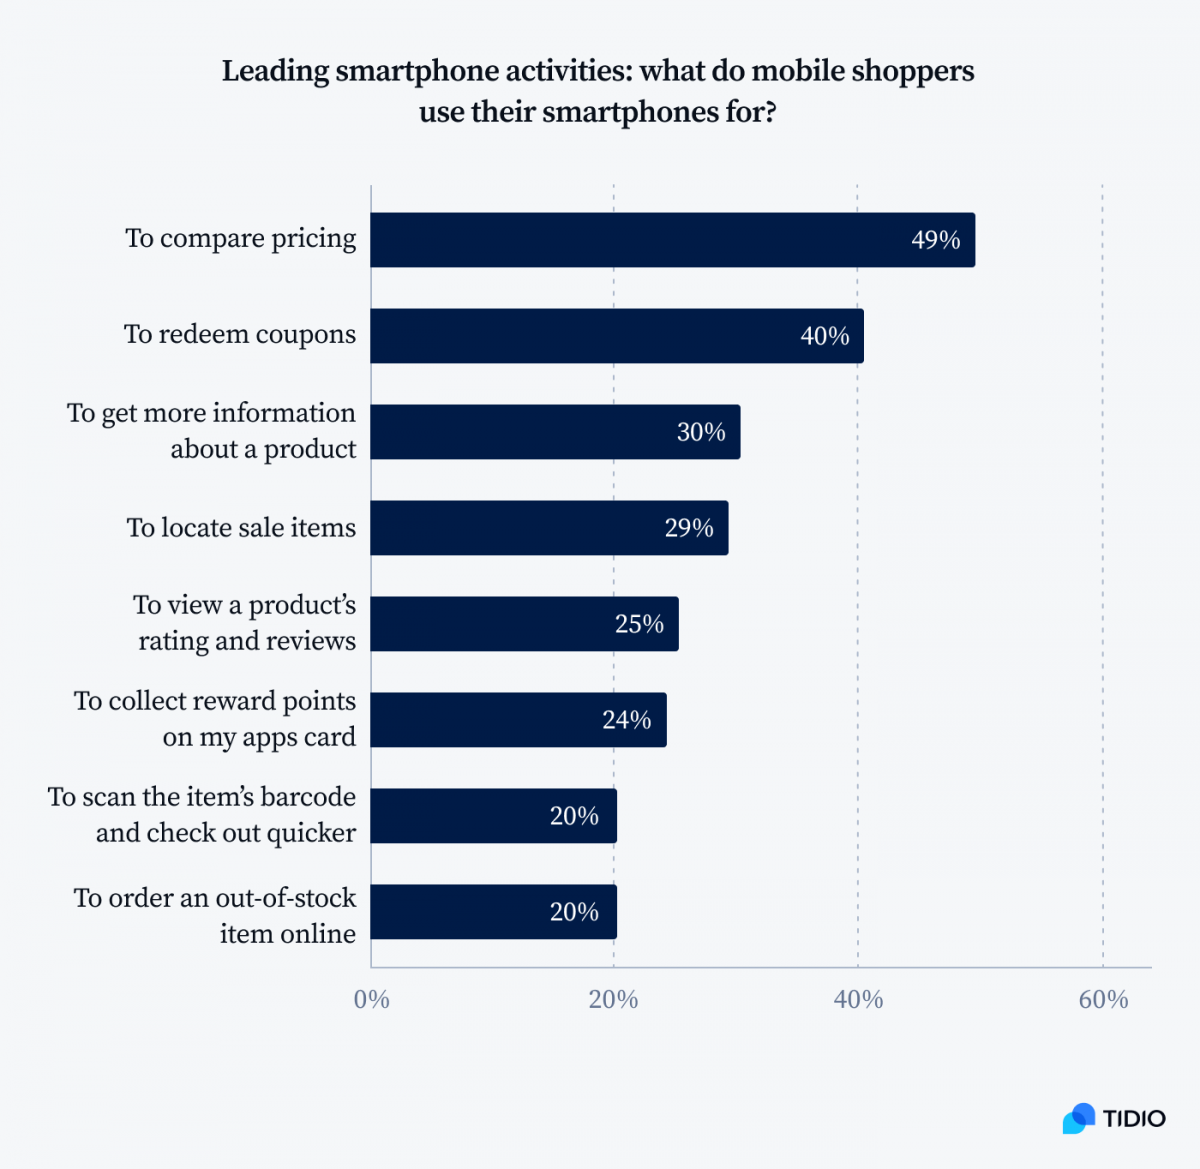 Graph showing leading smartphones activities: what do mobile shoppers use their smartphone for?